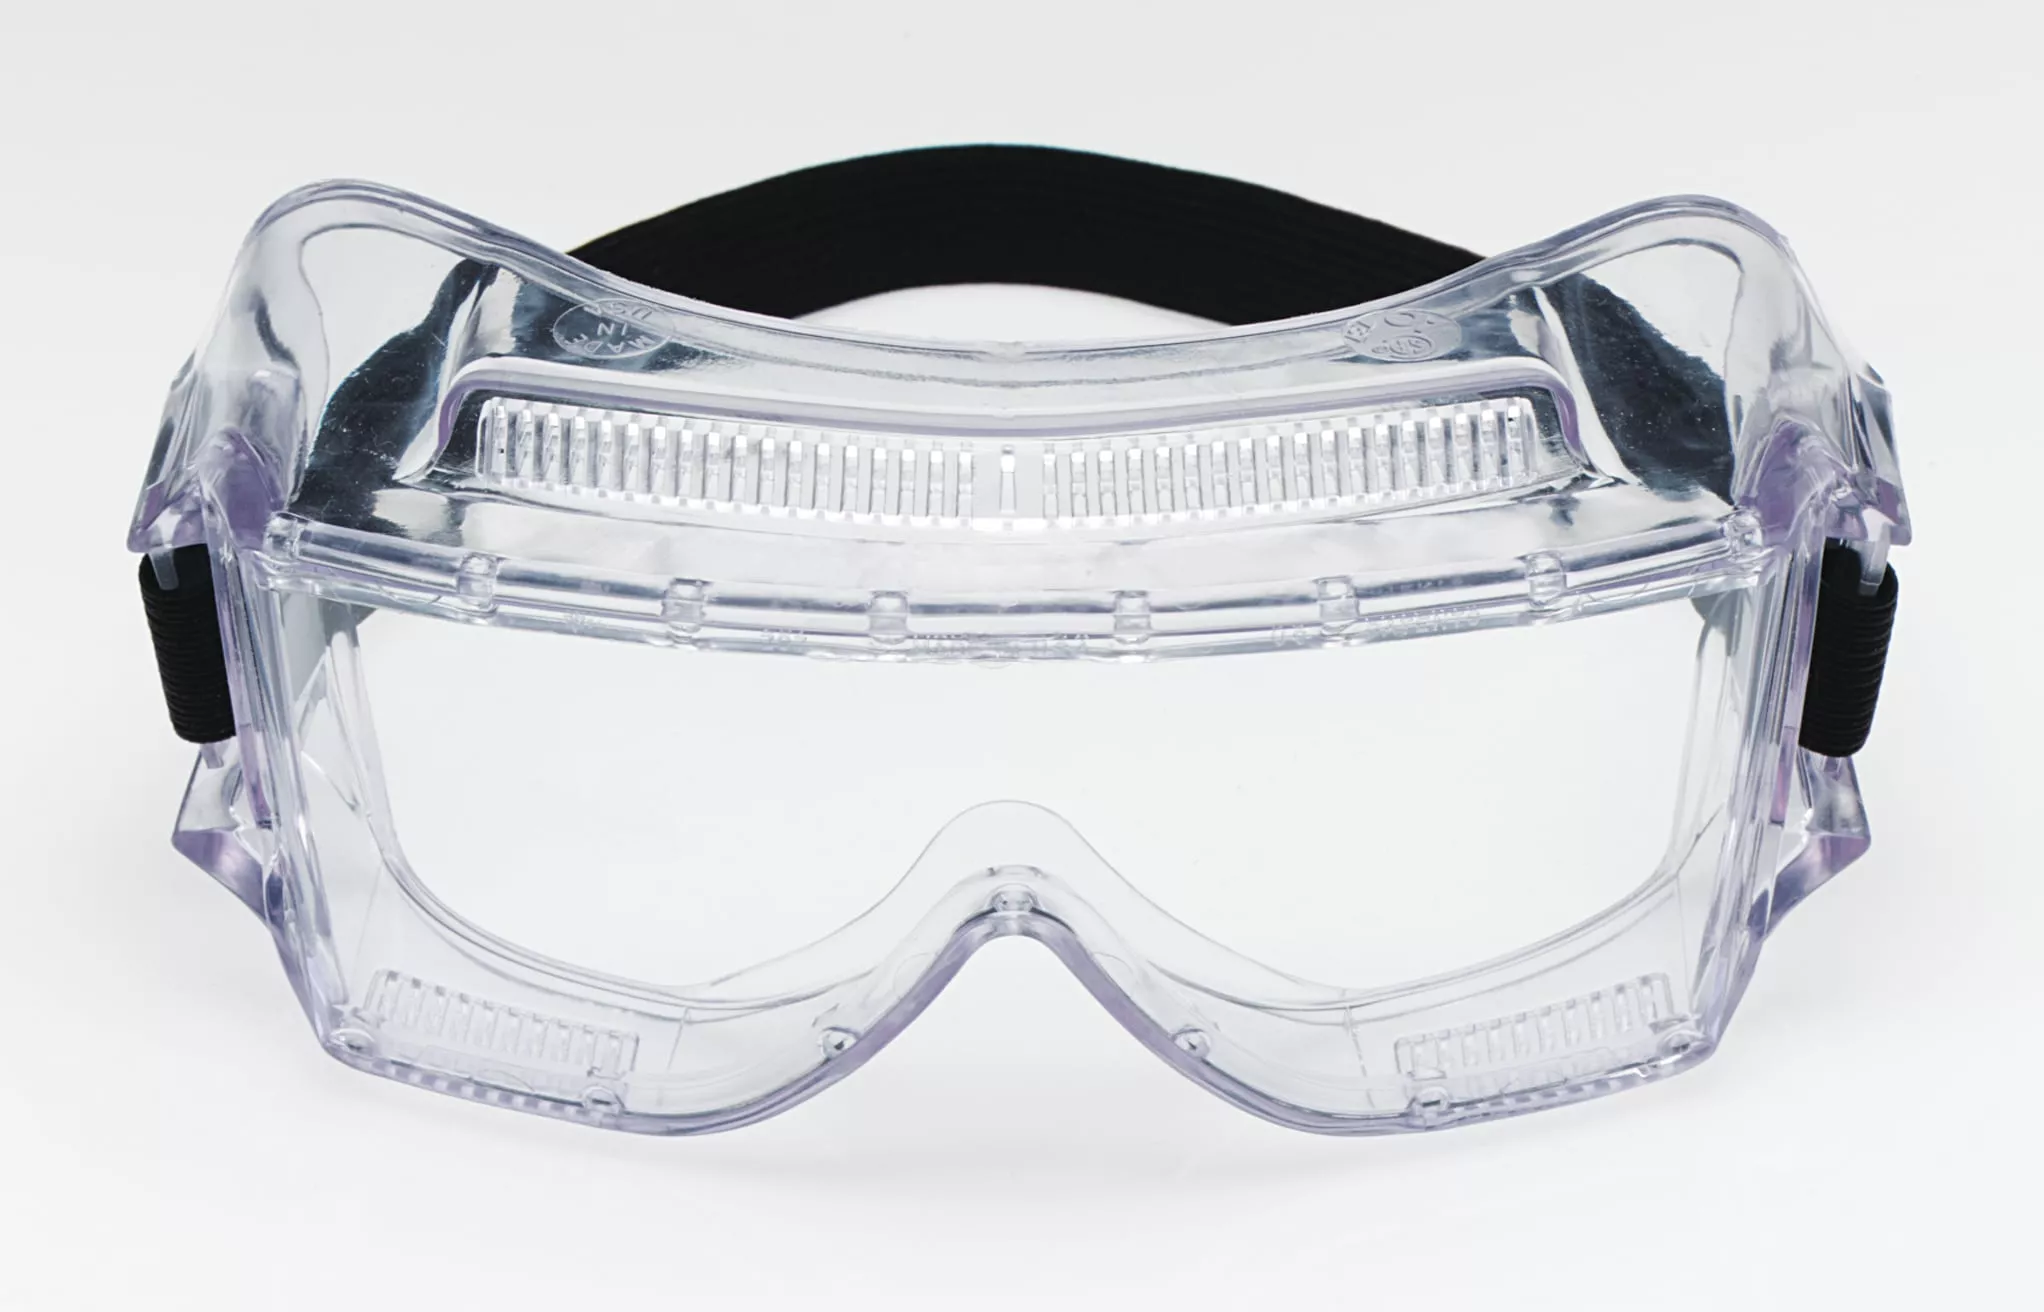 3M™ Centurion™ Impact Safety Goggles 452 40300-00000-10, Clear Lens, 10
ea/Case